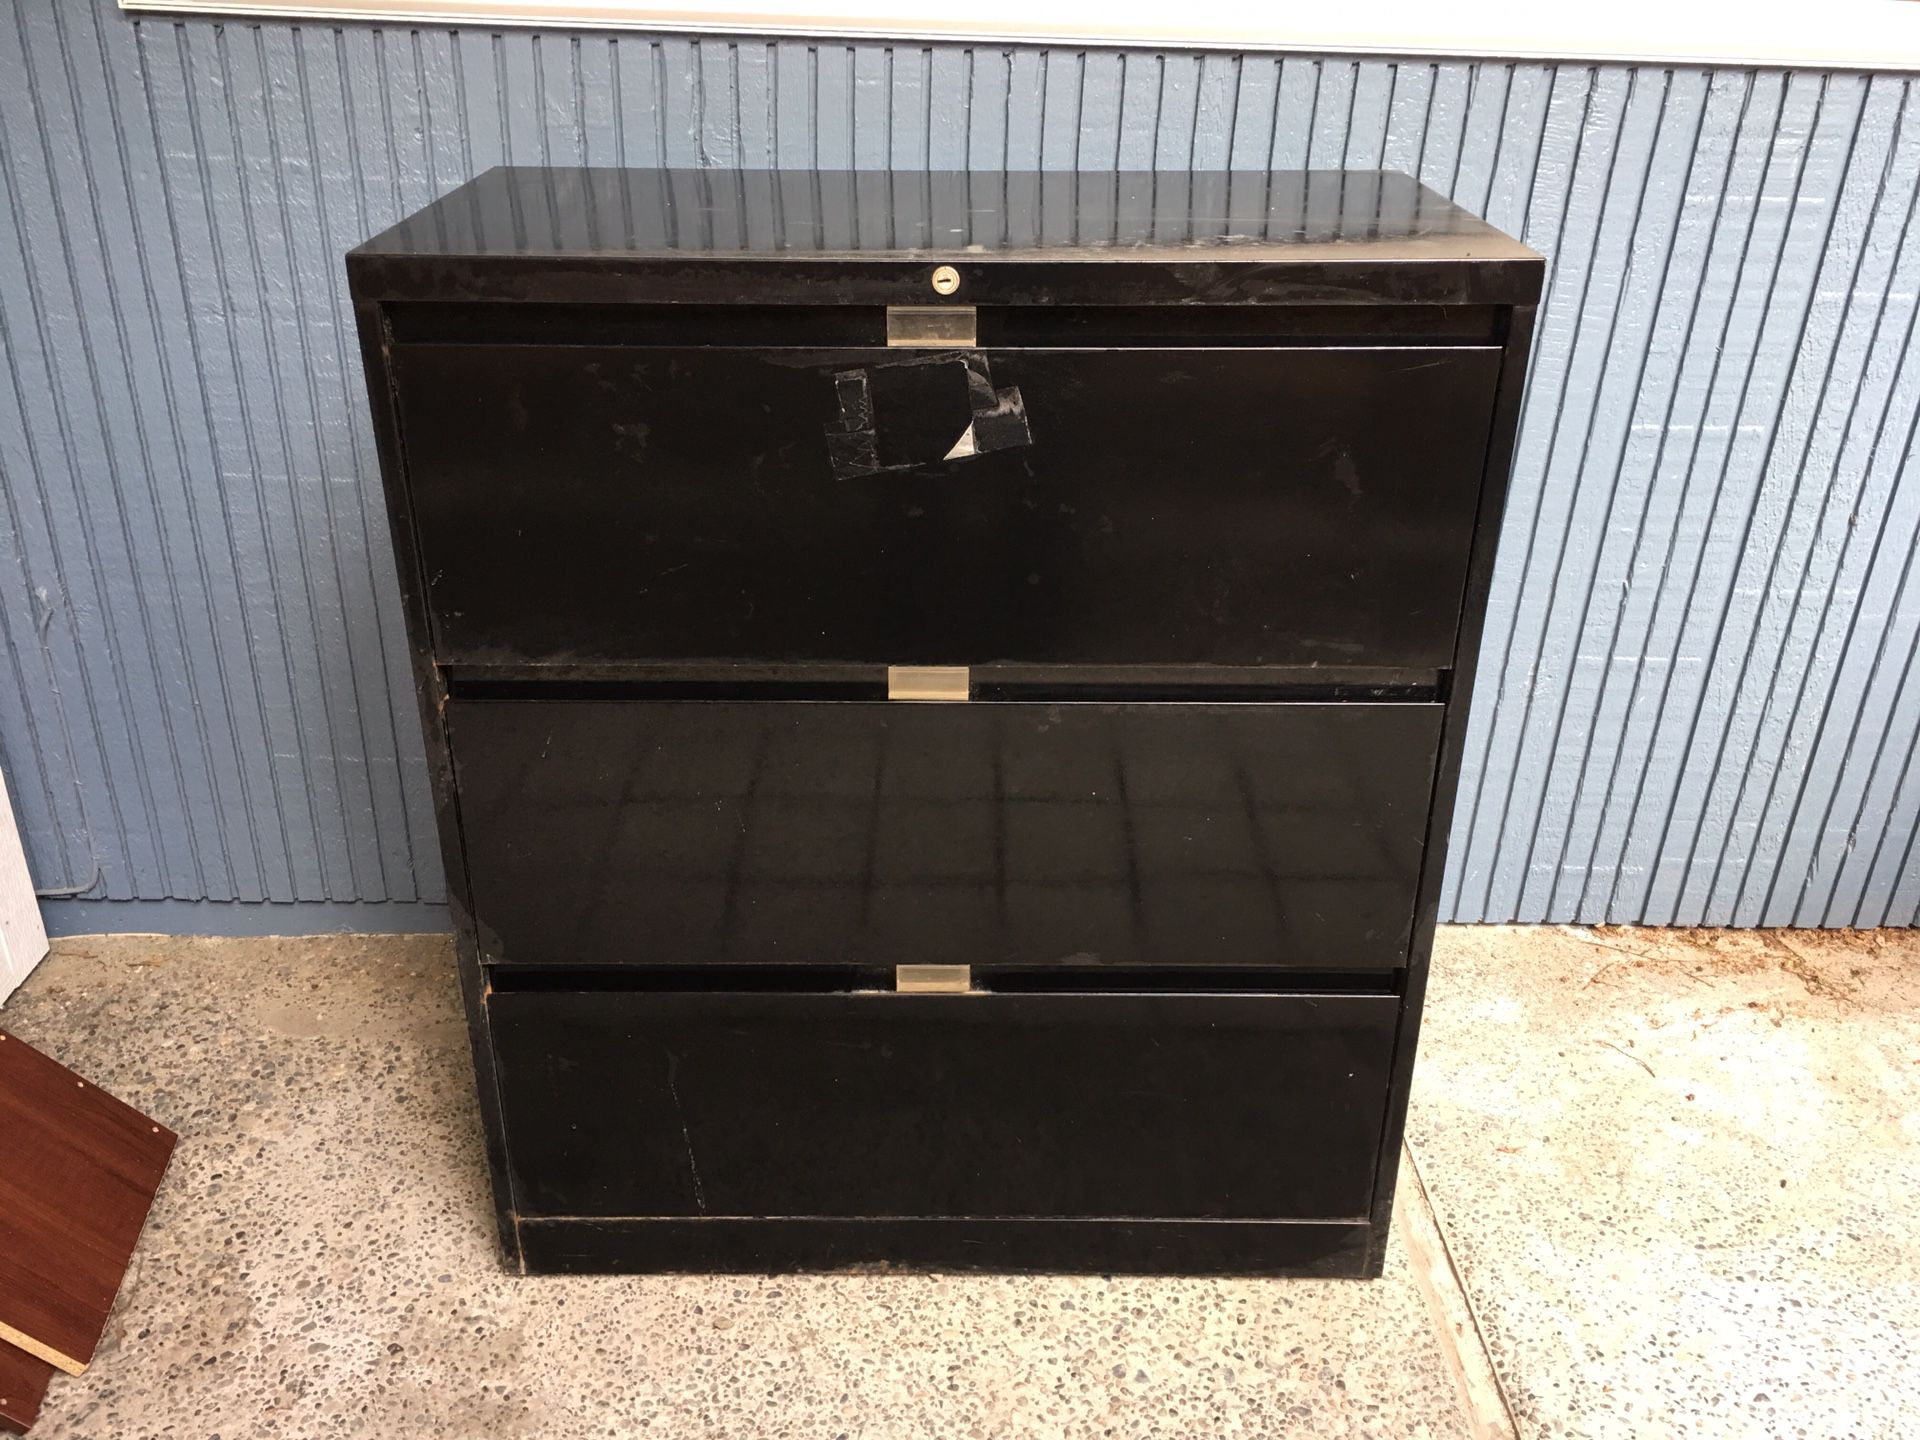 Heavy metal file cabinet for sale. Dimensions: 36" w 18" deep 41" h. $50 or best offer